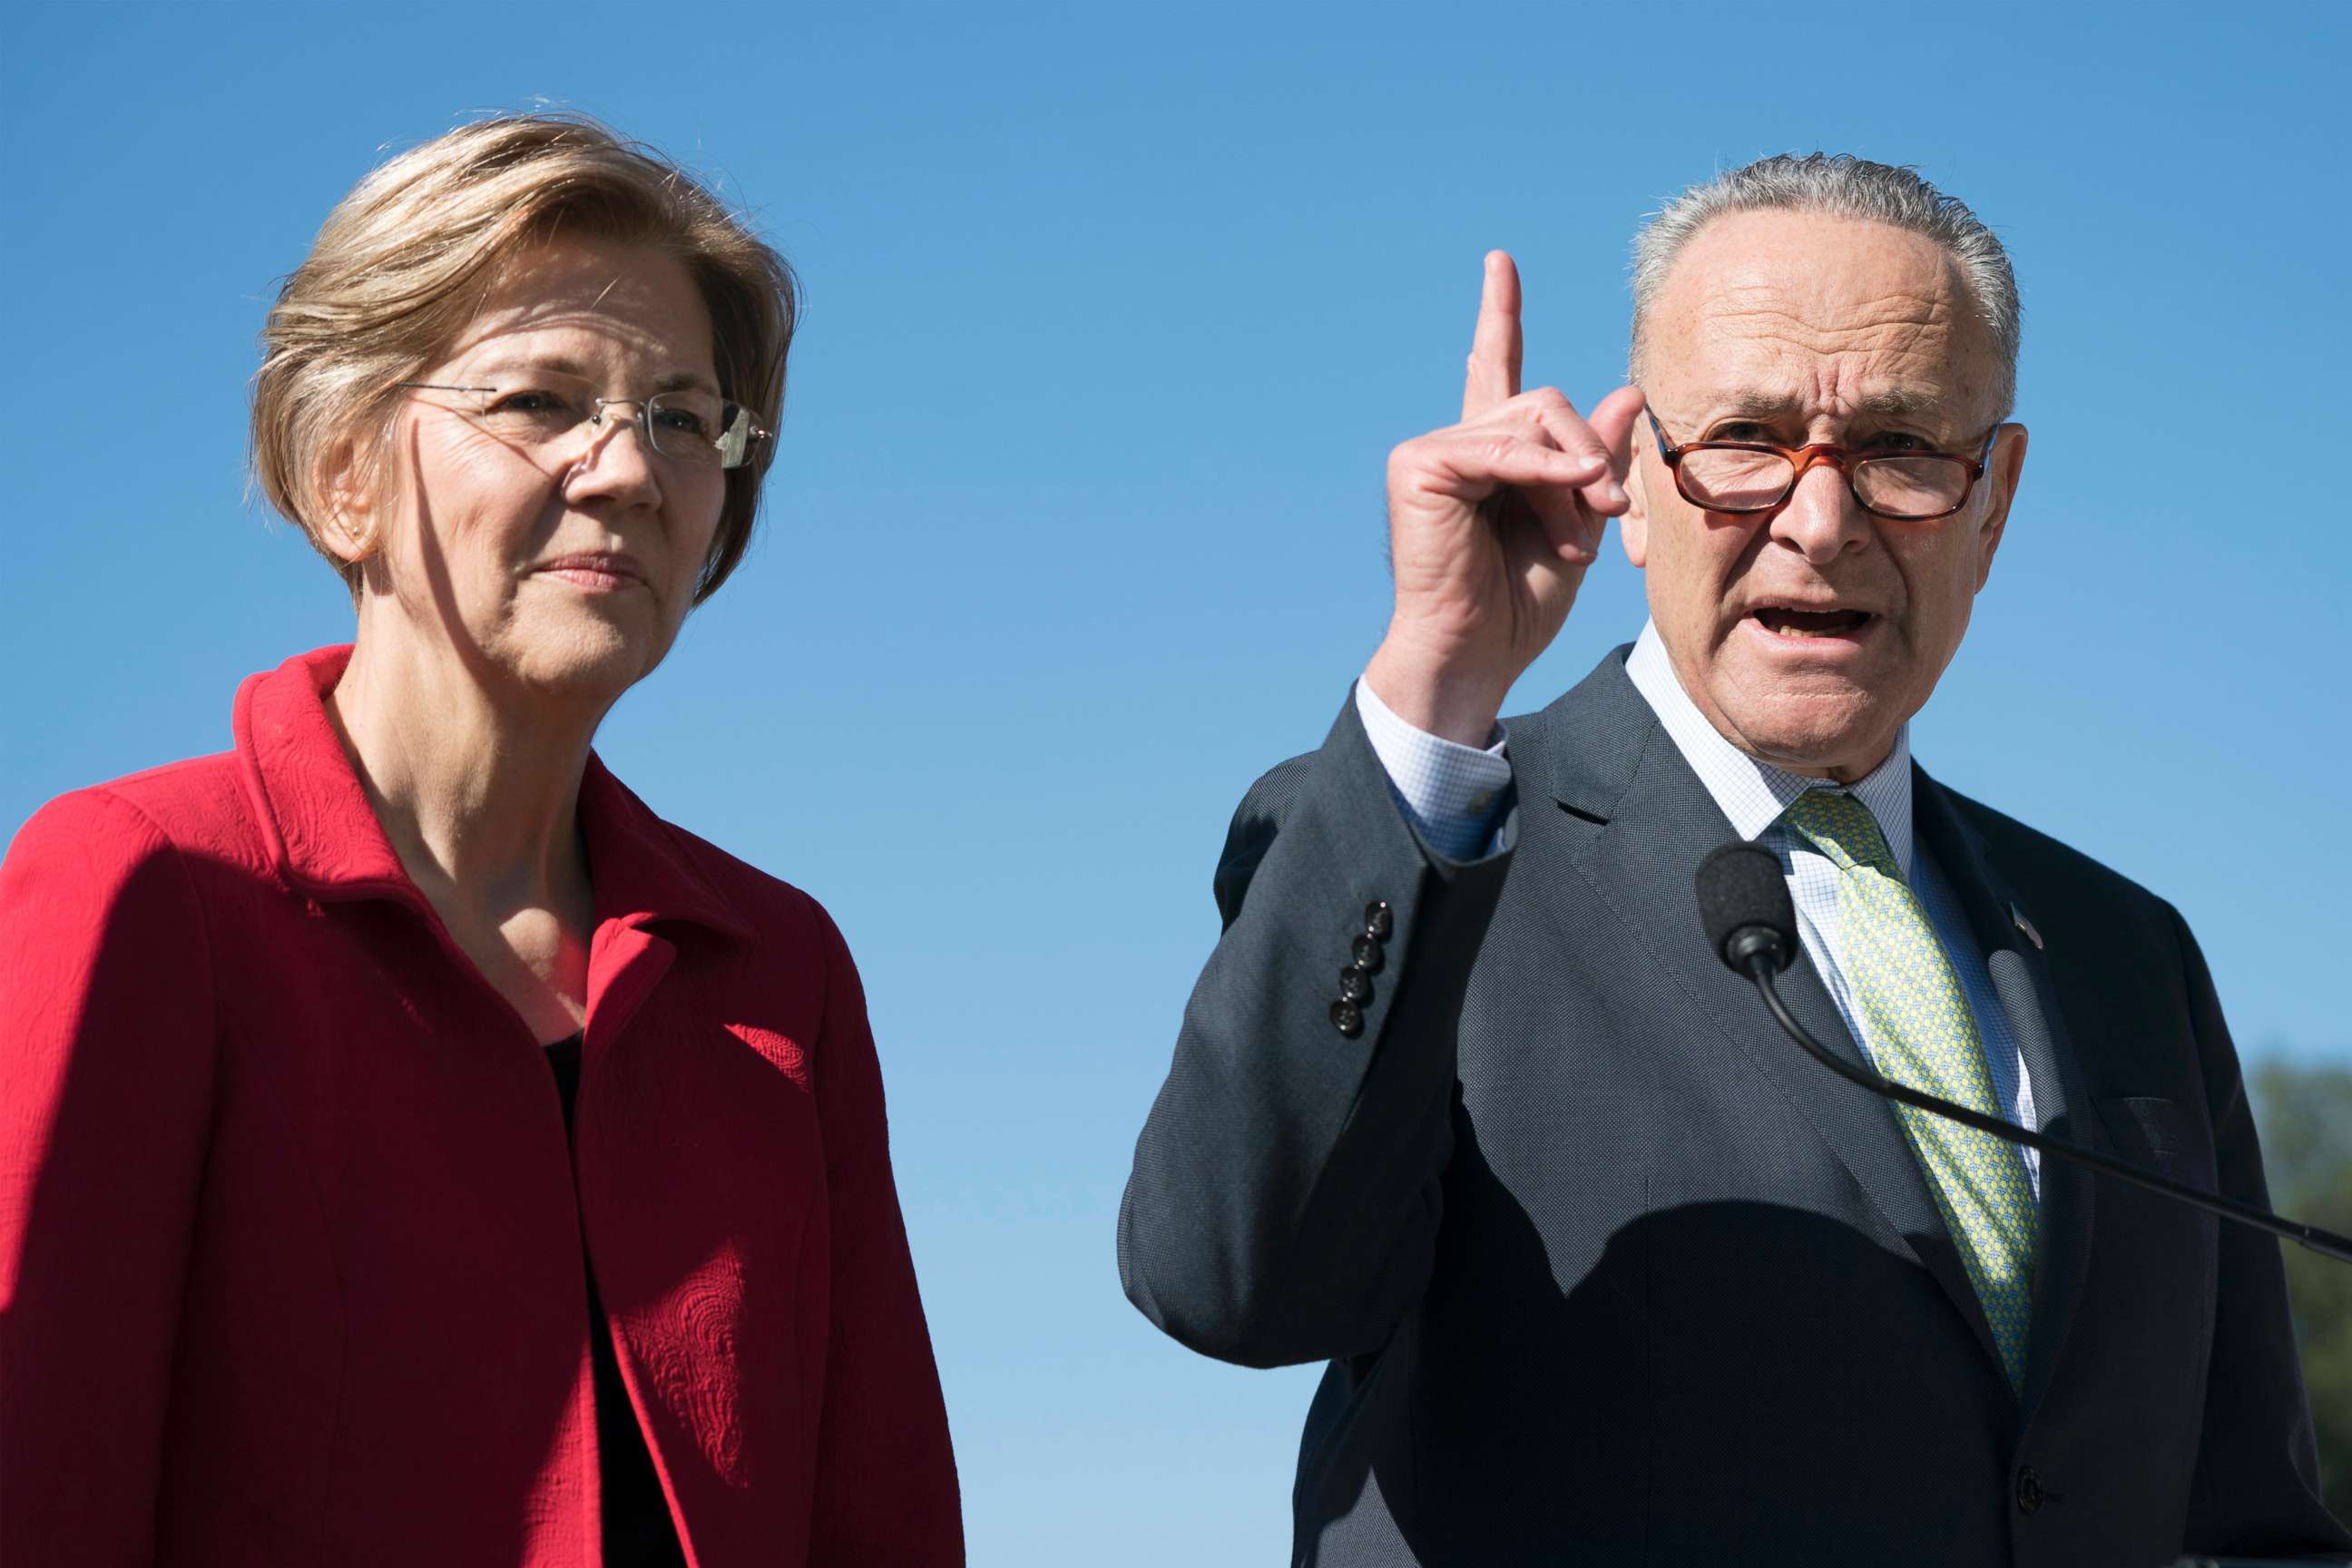 PHOTO: Senate Minority Leader Democrat Chuck Schumer speaks on Republican-crafted tax plans, beside Elizabeth Warren during a news conference on Capitol Hill in Washington, DC, Oct. 18, 2017. 